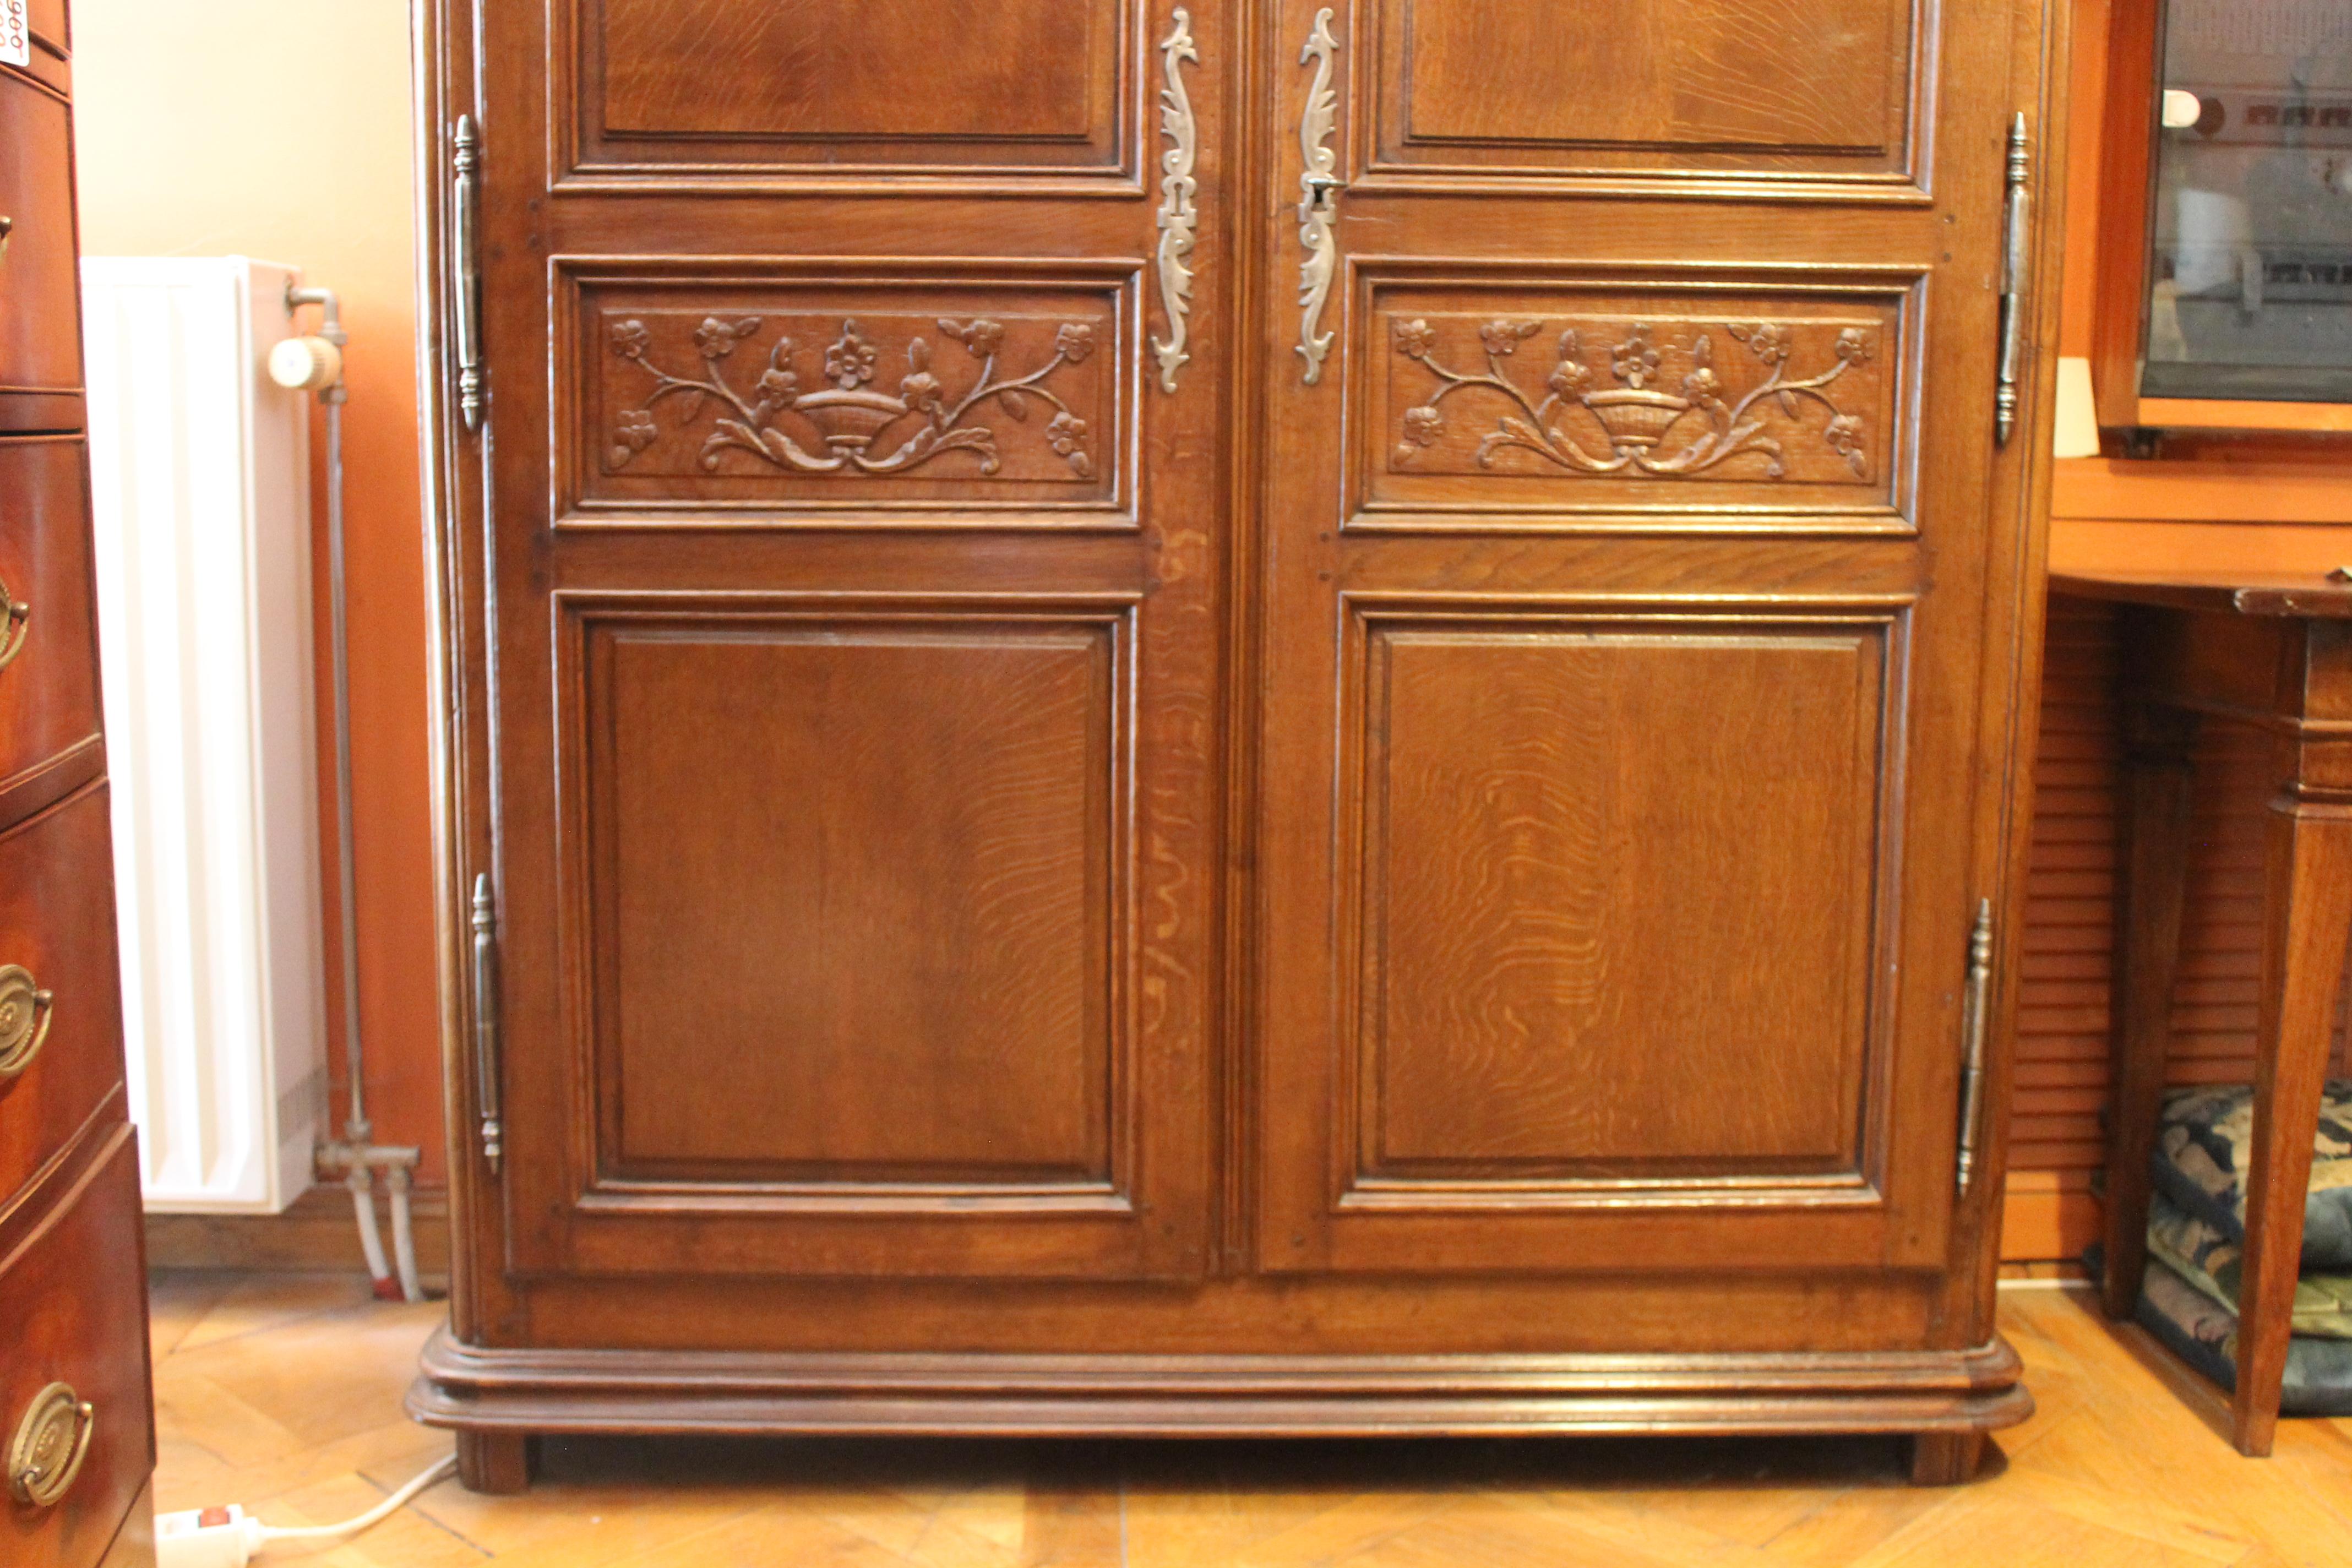 Very beautiful early 18th century Louis XIV antique French wardrobe in oak a Fine french wardrobe in superb condition with elegant floral decoration.

This wardrobe stands out by his reasable dimension and beautiful proportions. Beautiful cornice